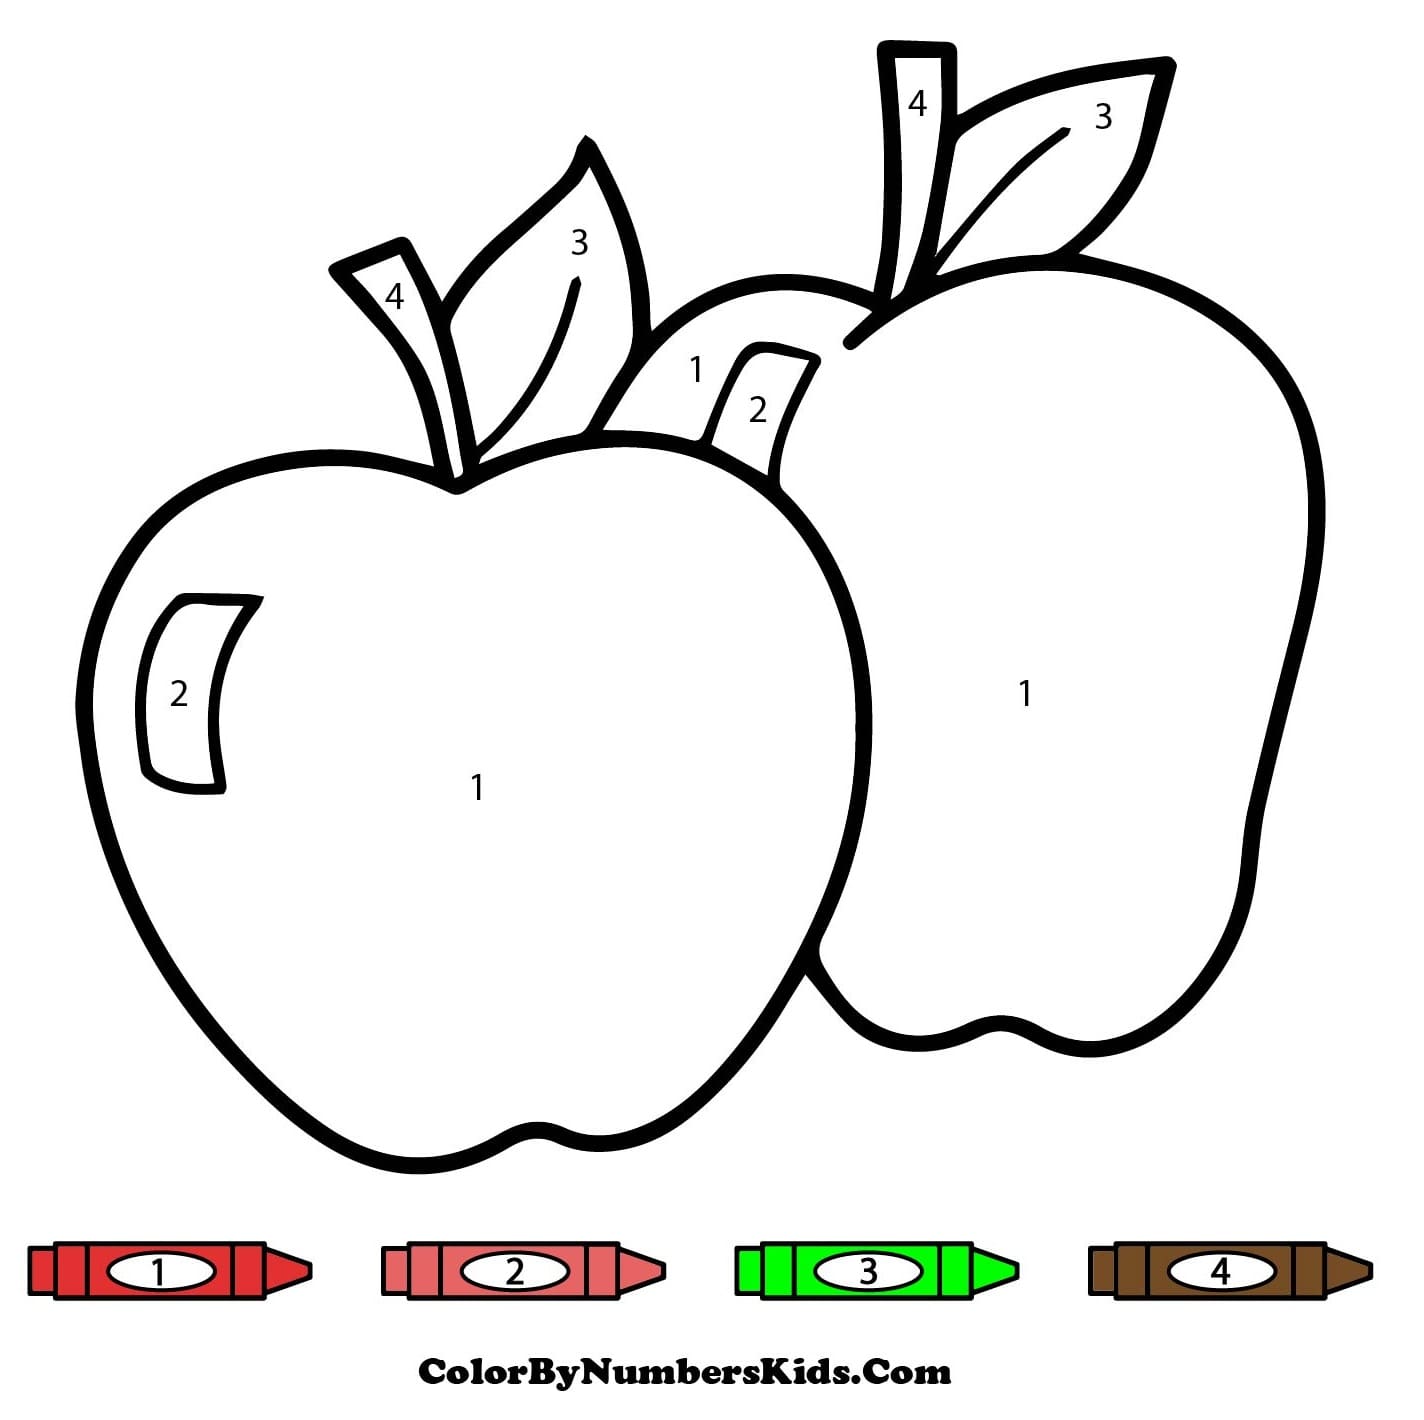 Two Apples Color By Number